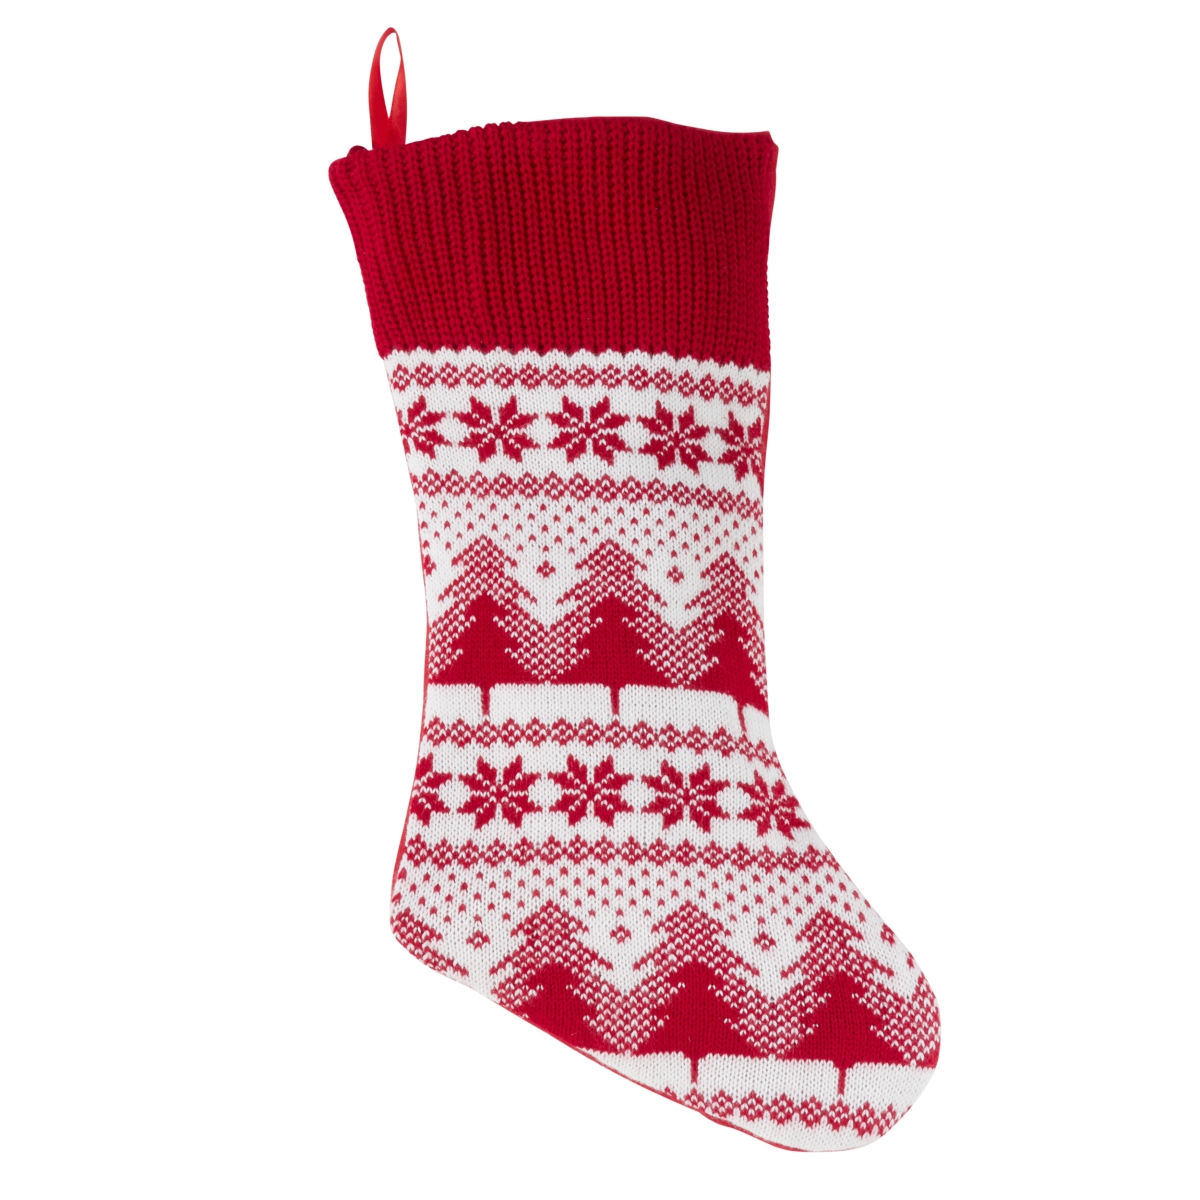 2061.r1720 Holiday Stocking With Christmas Tree Design, Red & White